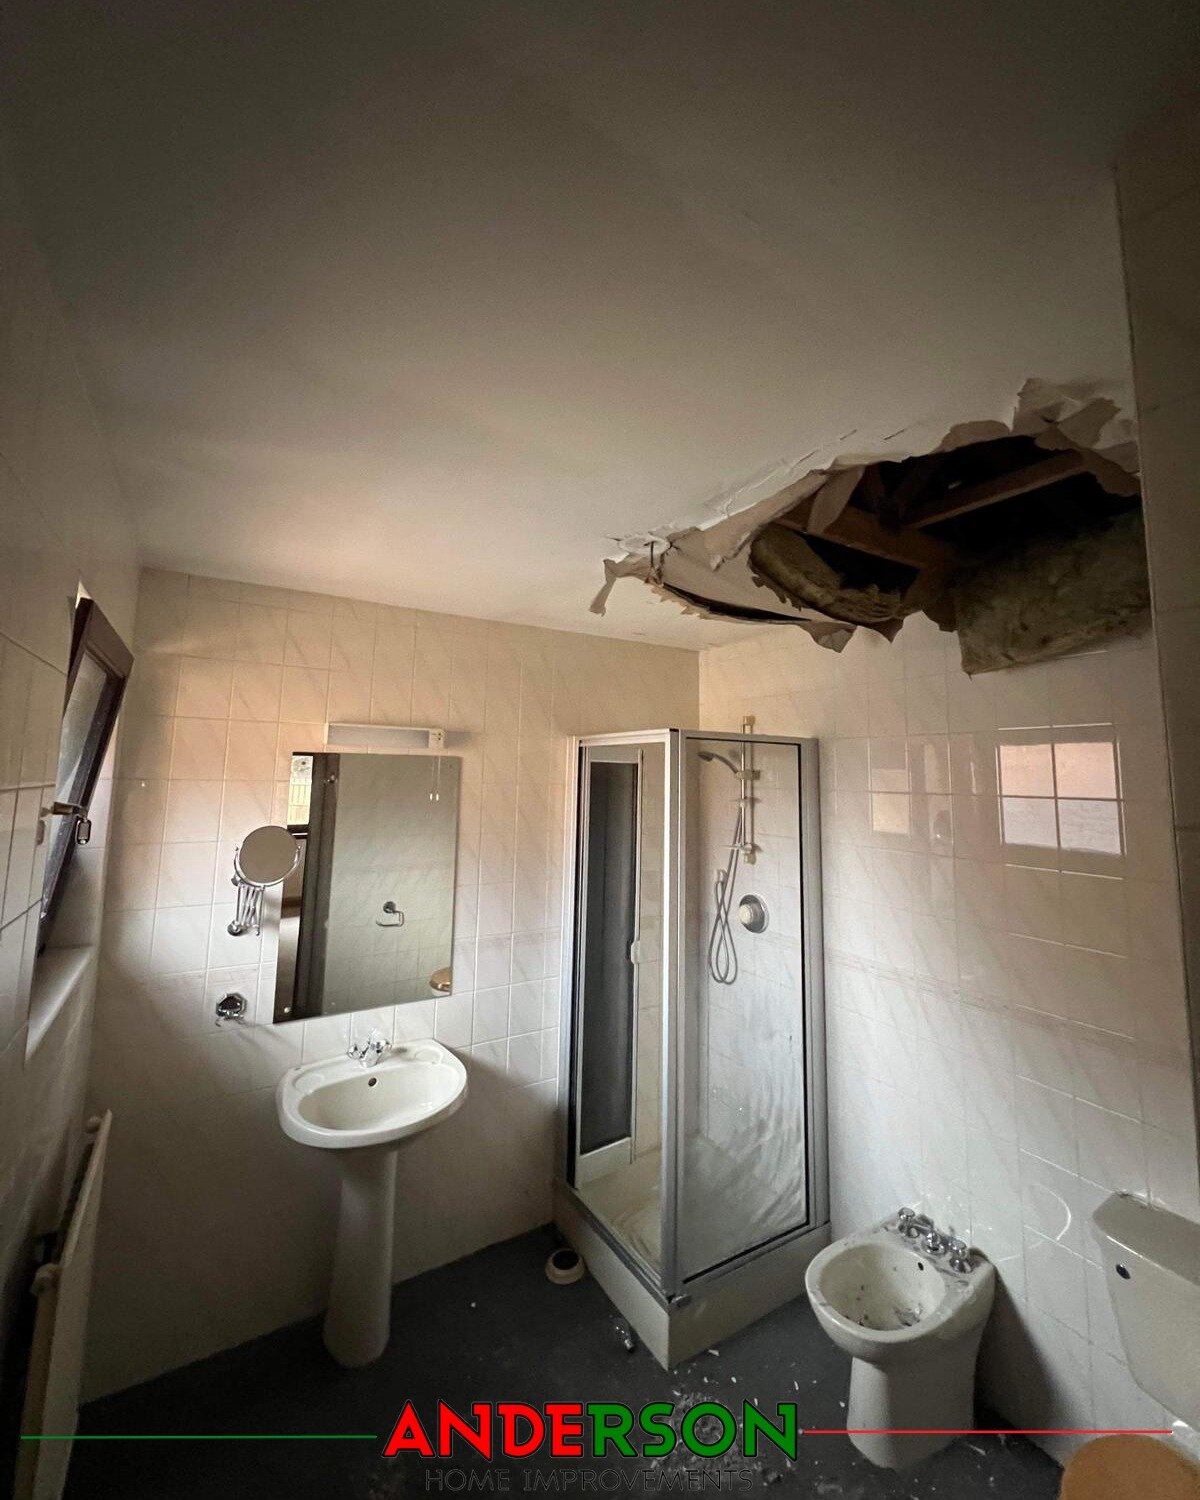 Simple yet Amazing transformation!

This home wasn't in the best condition when the customer came to us.. He asked us to ensure the house was at a sellable condition and of course, we came through!

Ripped down all the ceilings
Plaster boarded &amp; 